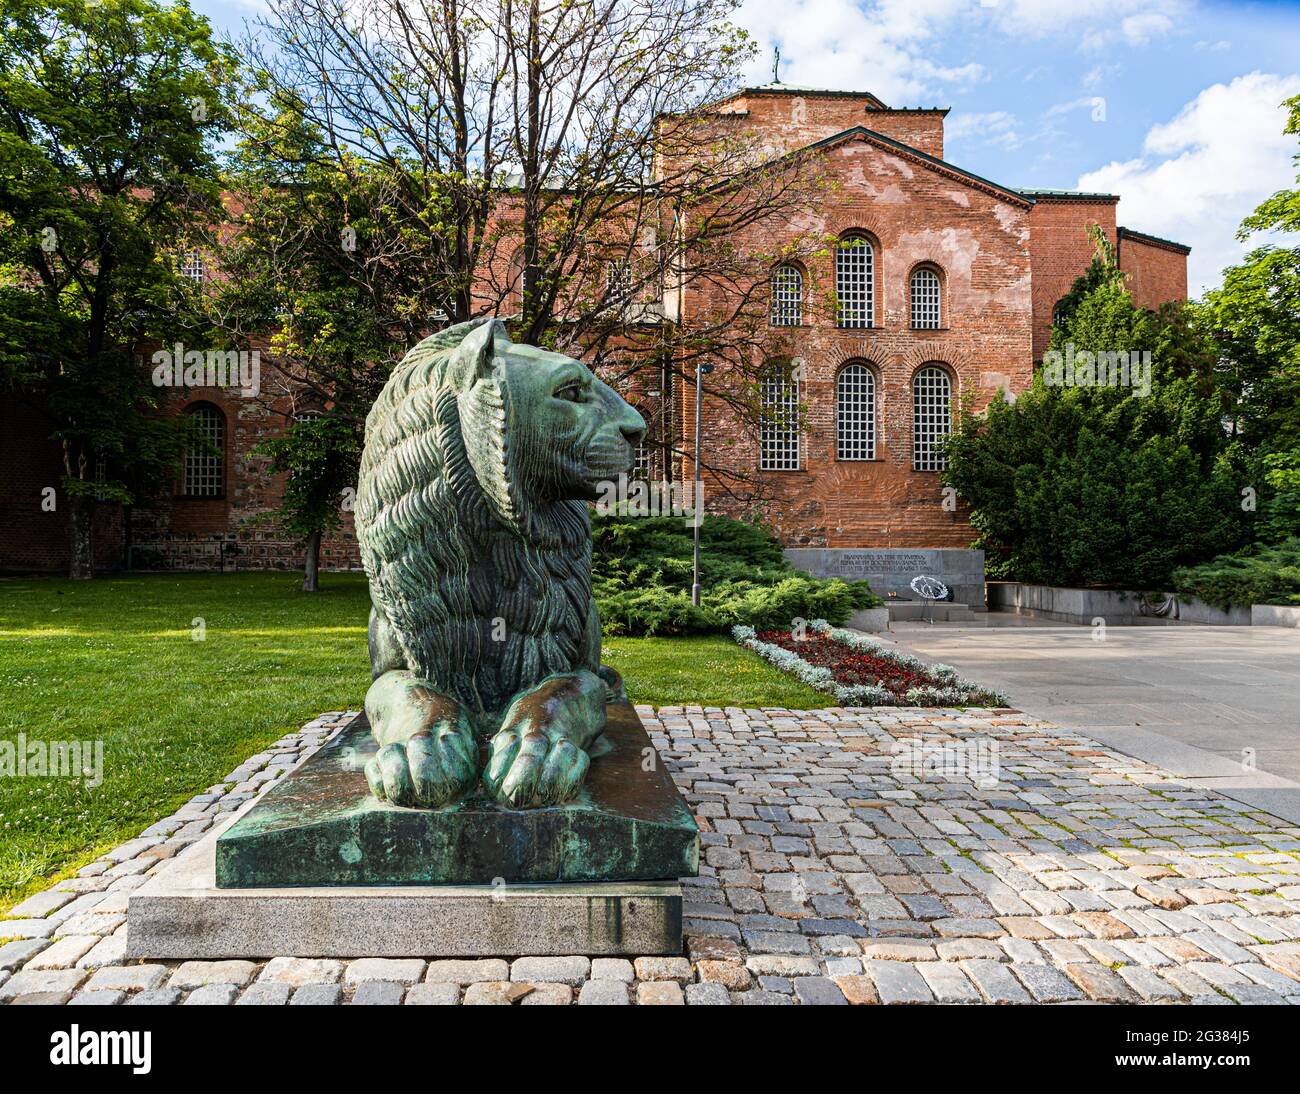 The lion as a royal symbol had disappeared for a while and now it sits crooked on its pedestal in front of the Eternal fire in memory of the Bulgarian martyrs in Sofia, Bulgaria Stock Photo